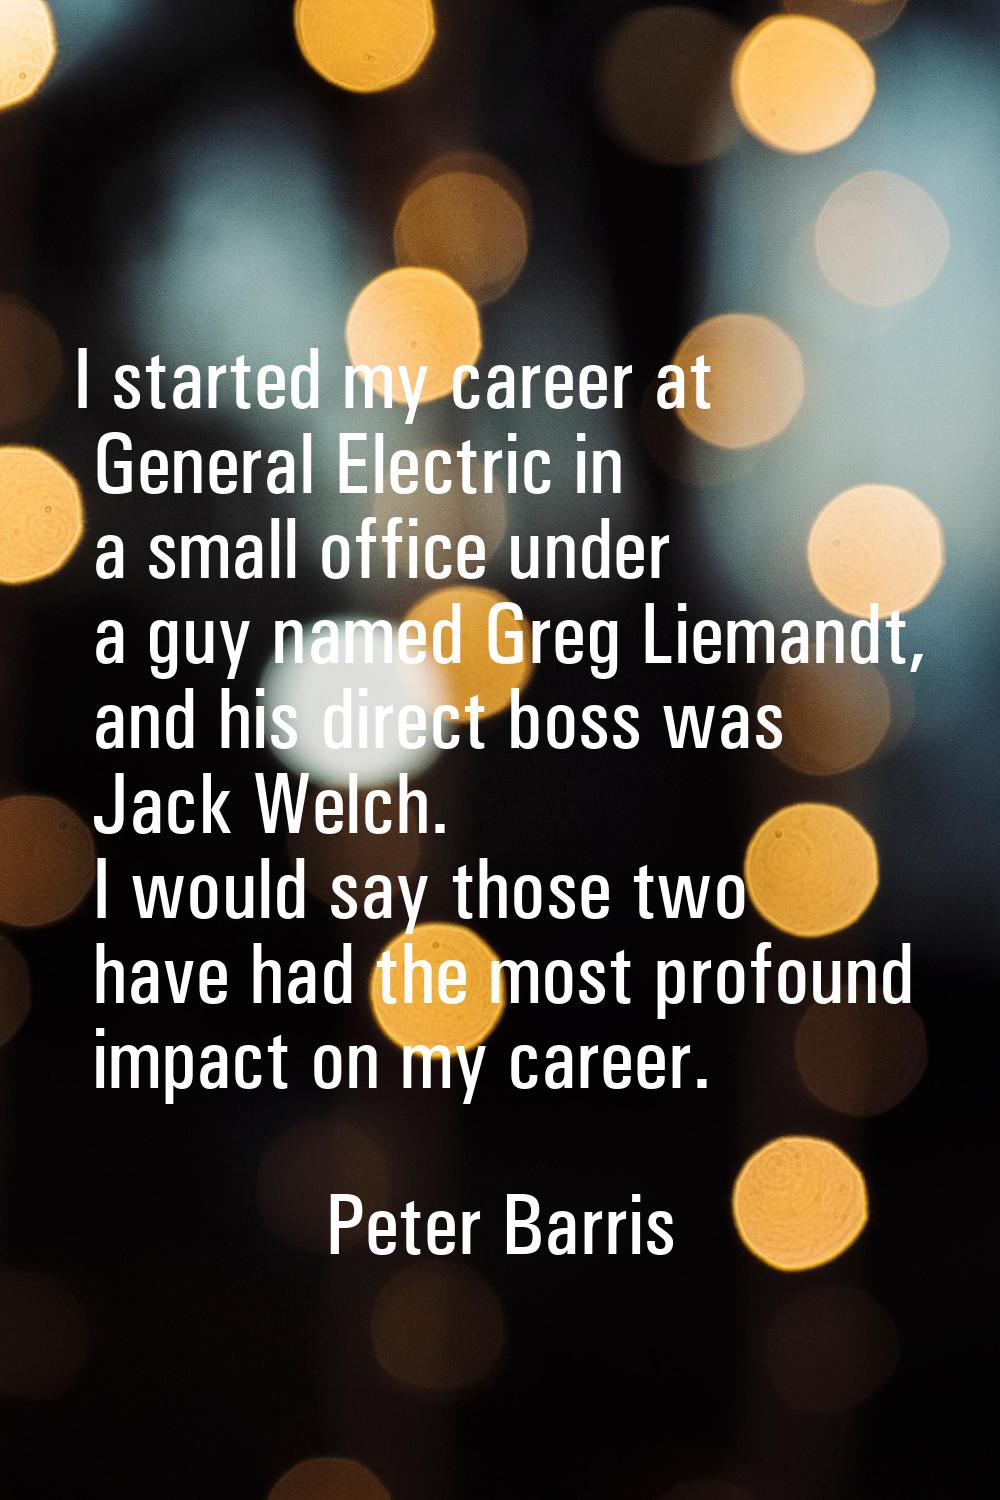 I started my career at General Electric in a small office under a guy named Greg Liemandt, and his 